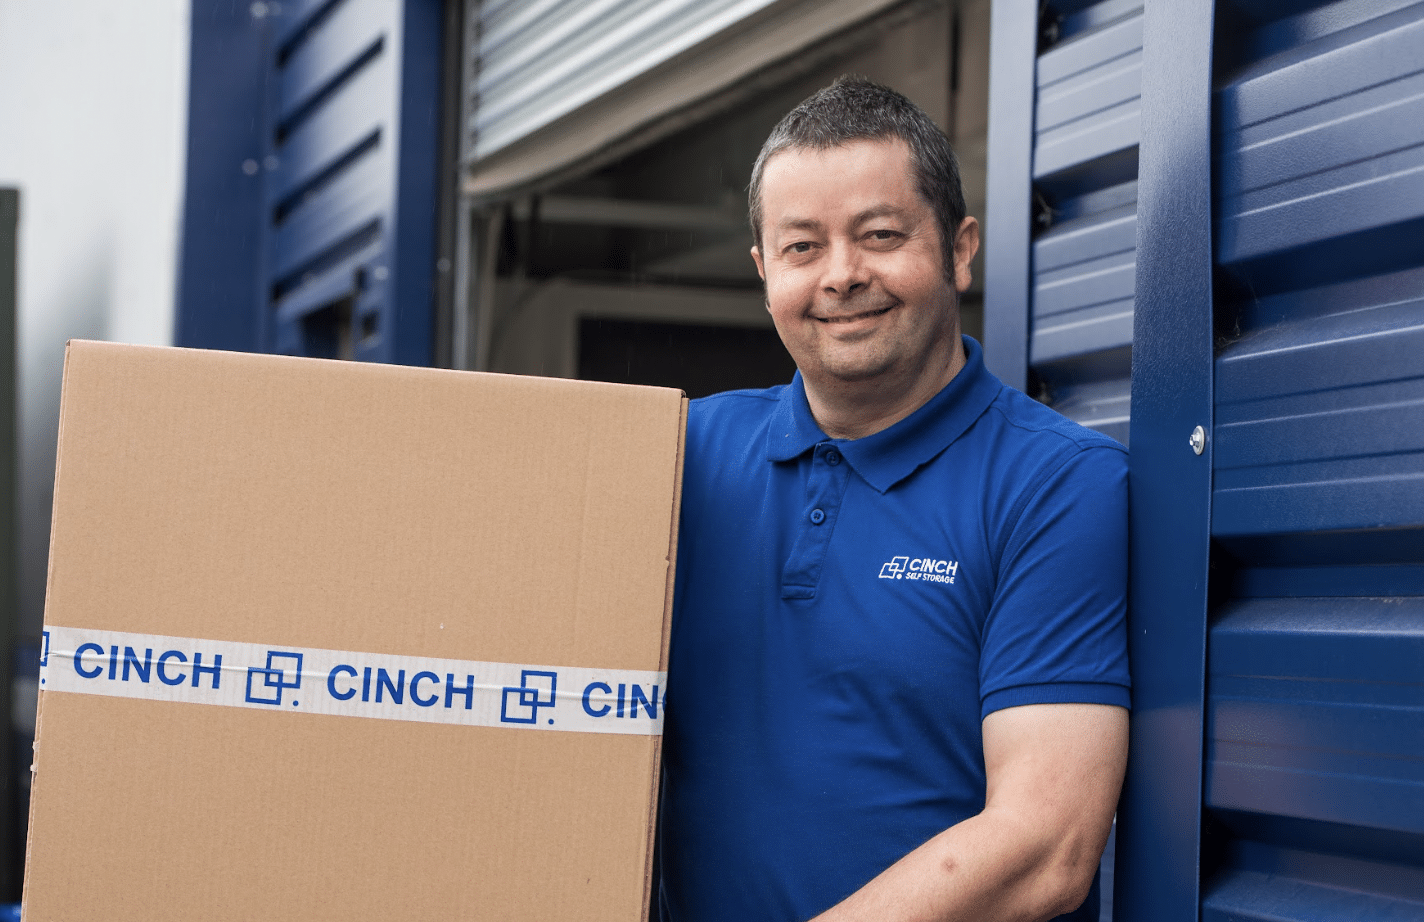 benefits_of_short_term_storage. Image shows a Cinch self storage employee wearing a blue branded top and holding a Cinch self storage cardboard box in front of shutter doors.